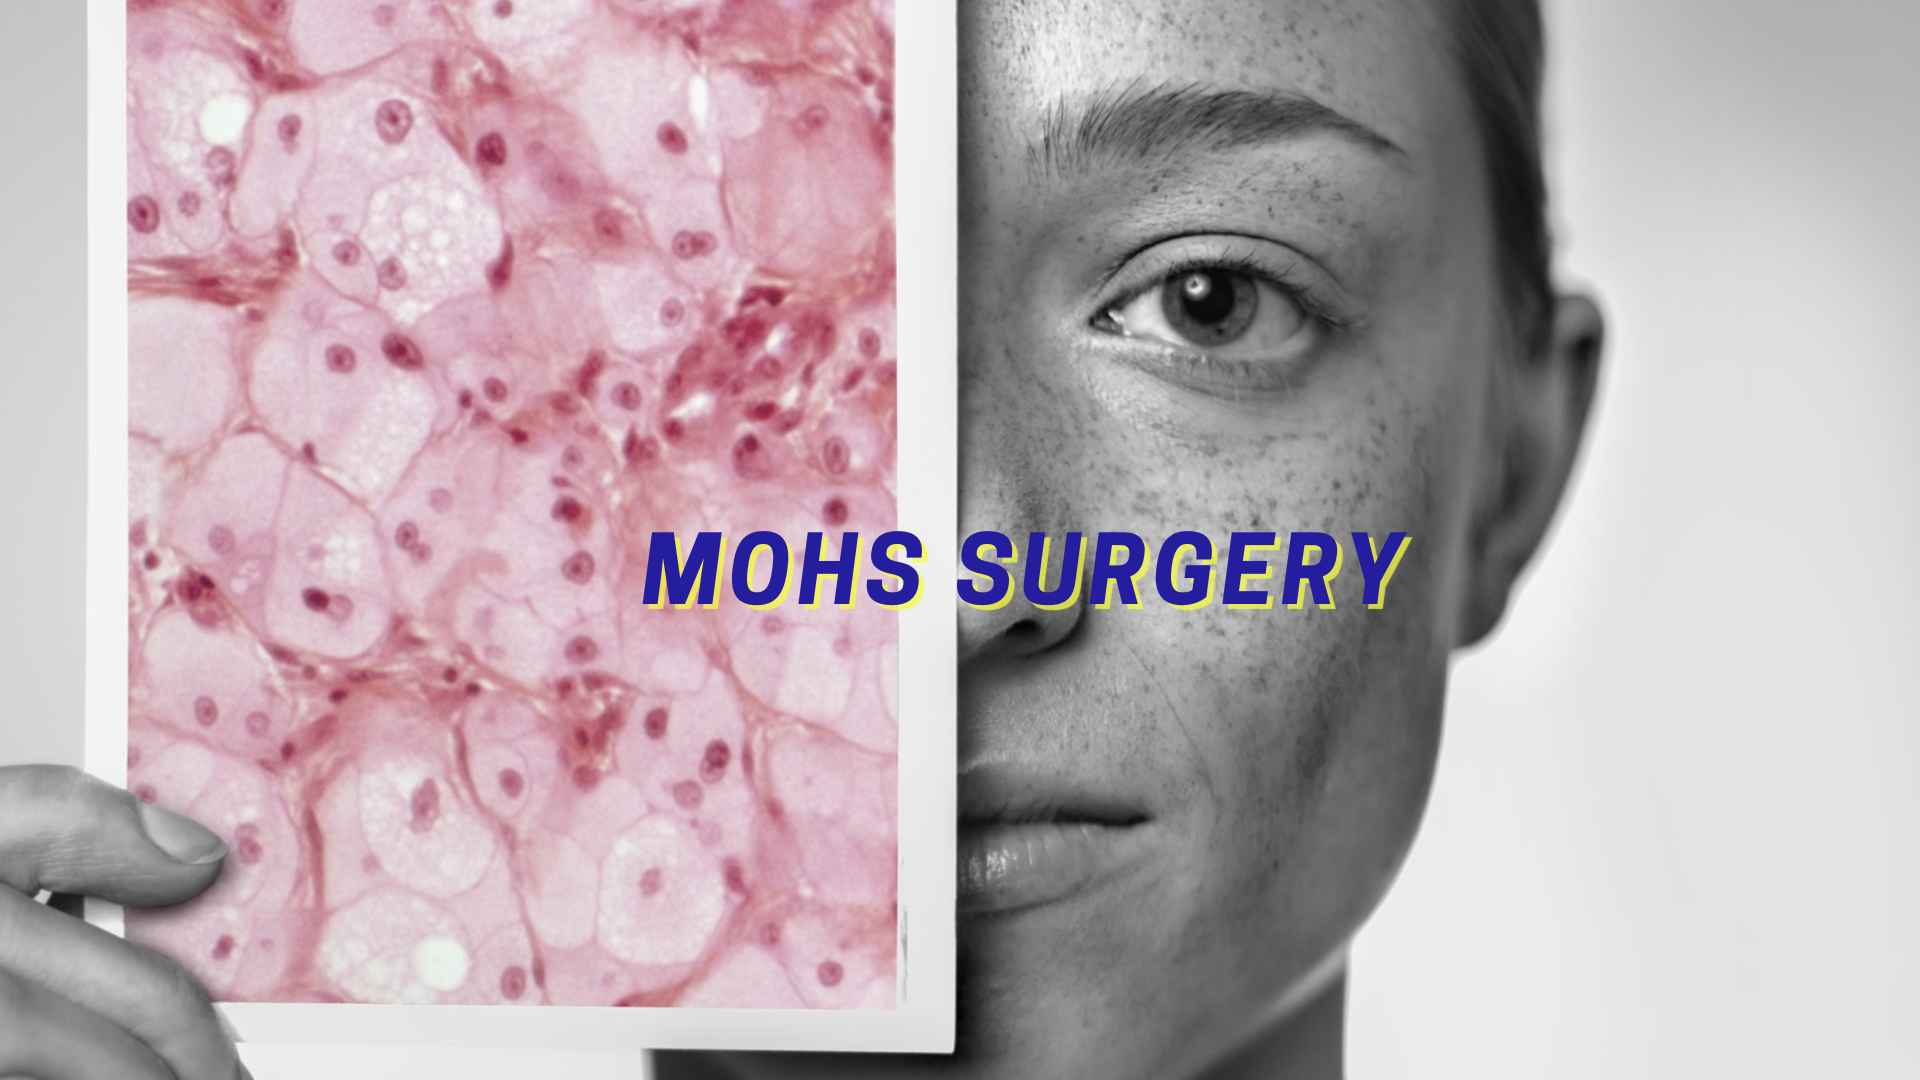 Mohs Surgery - showing skin cancer cells